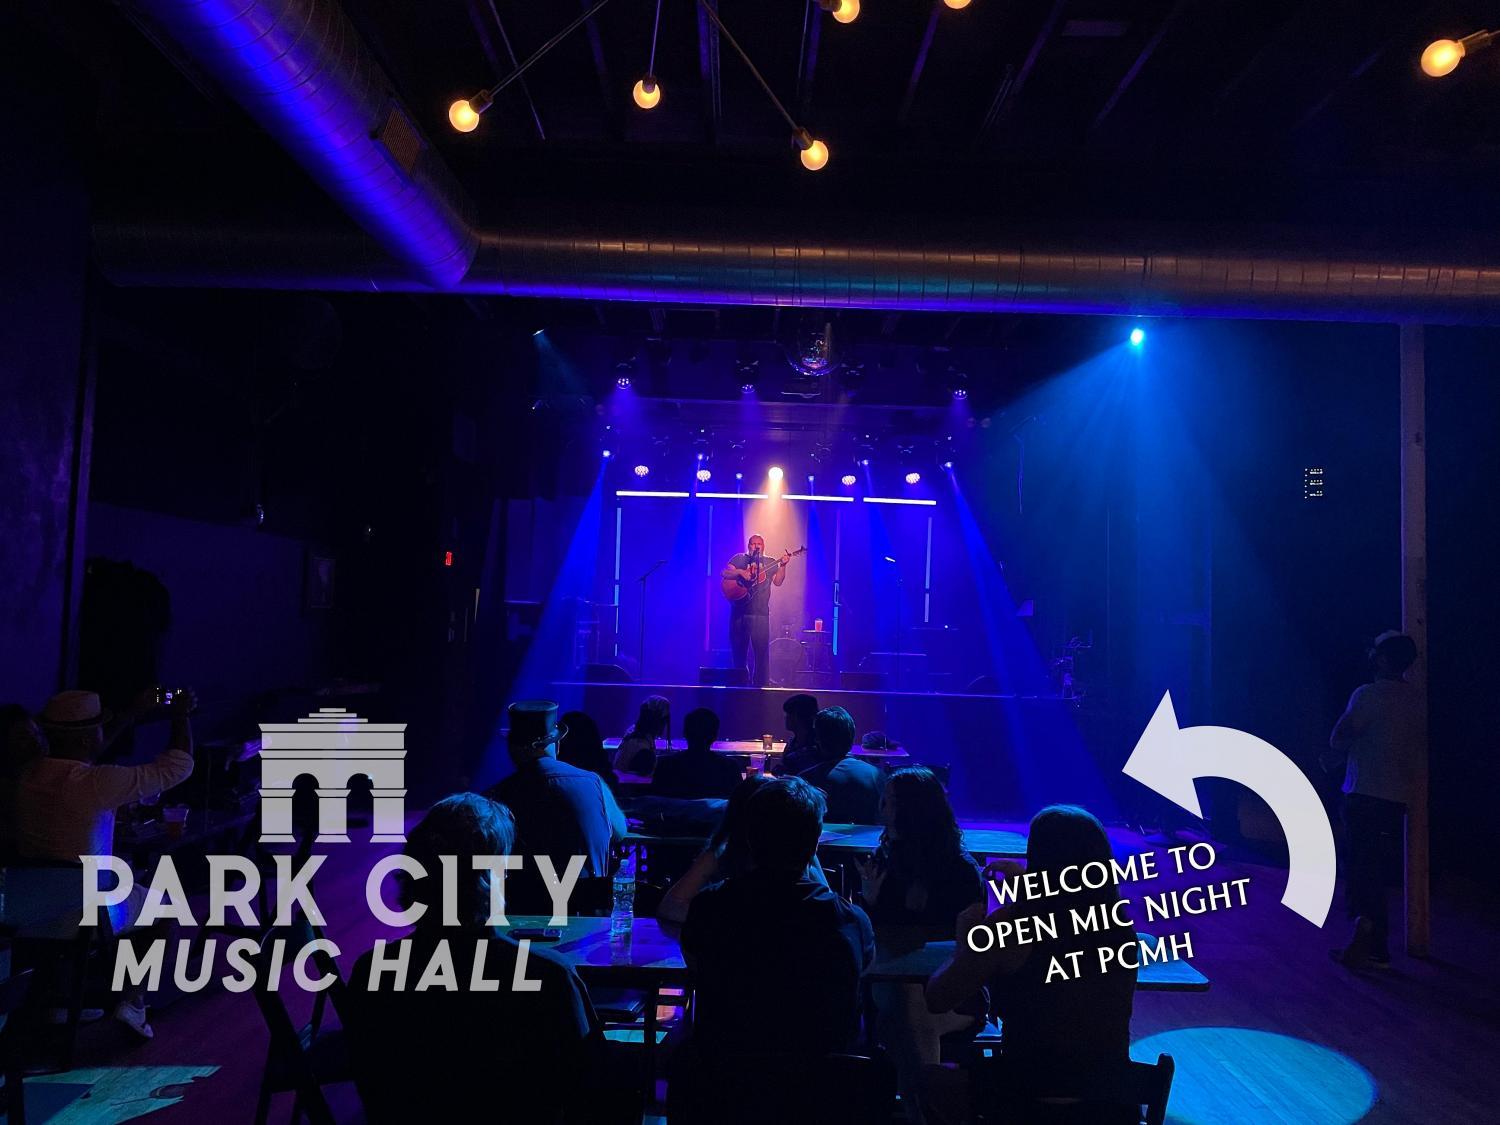 Weekly Open Mic Night At Park City Music Hall!